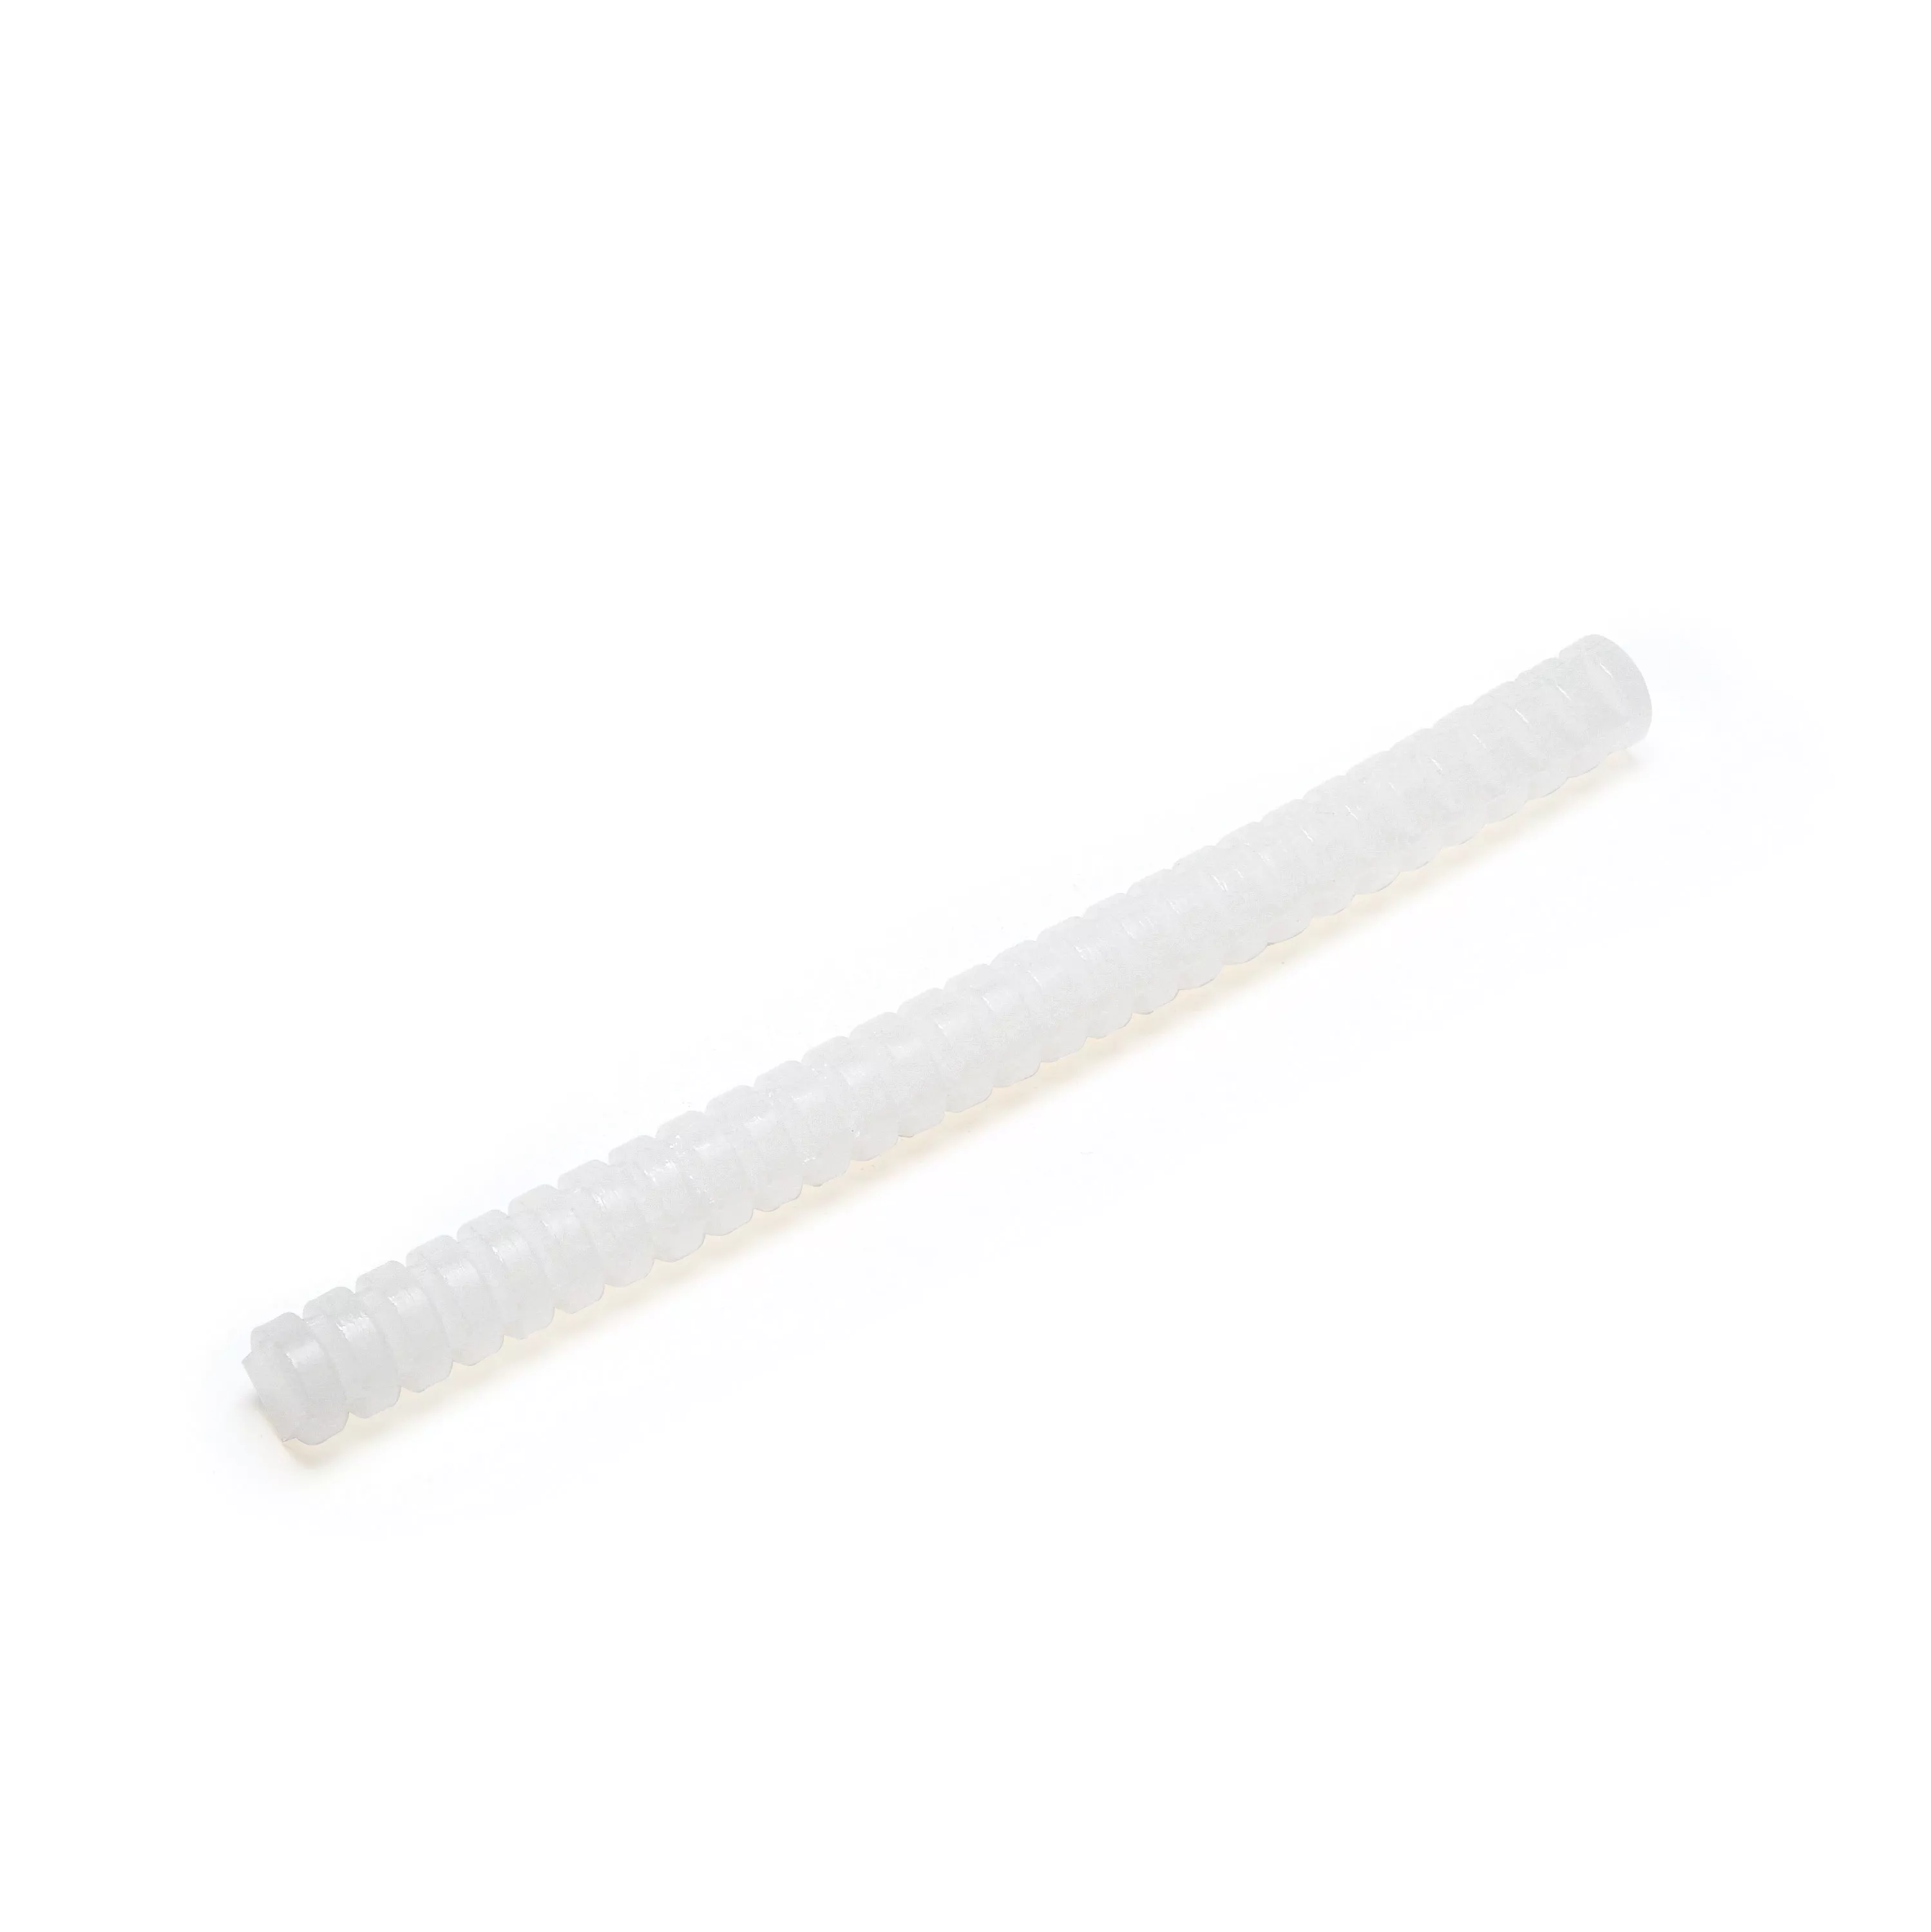 3M™ Hot Melt Adhesive 3792Q, Clear, 5/8 in x 8 in, 11 lb, Case